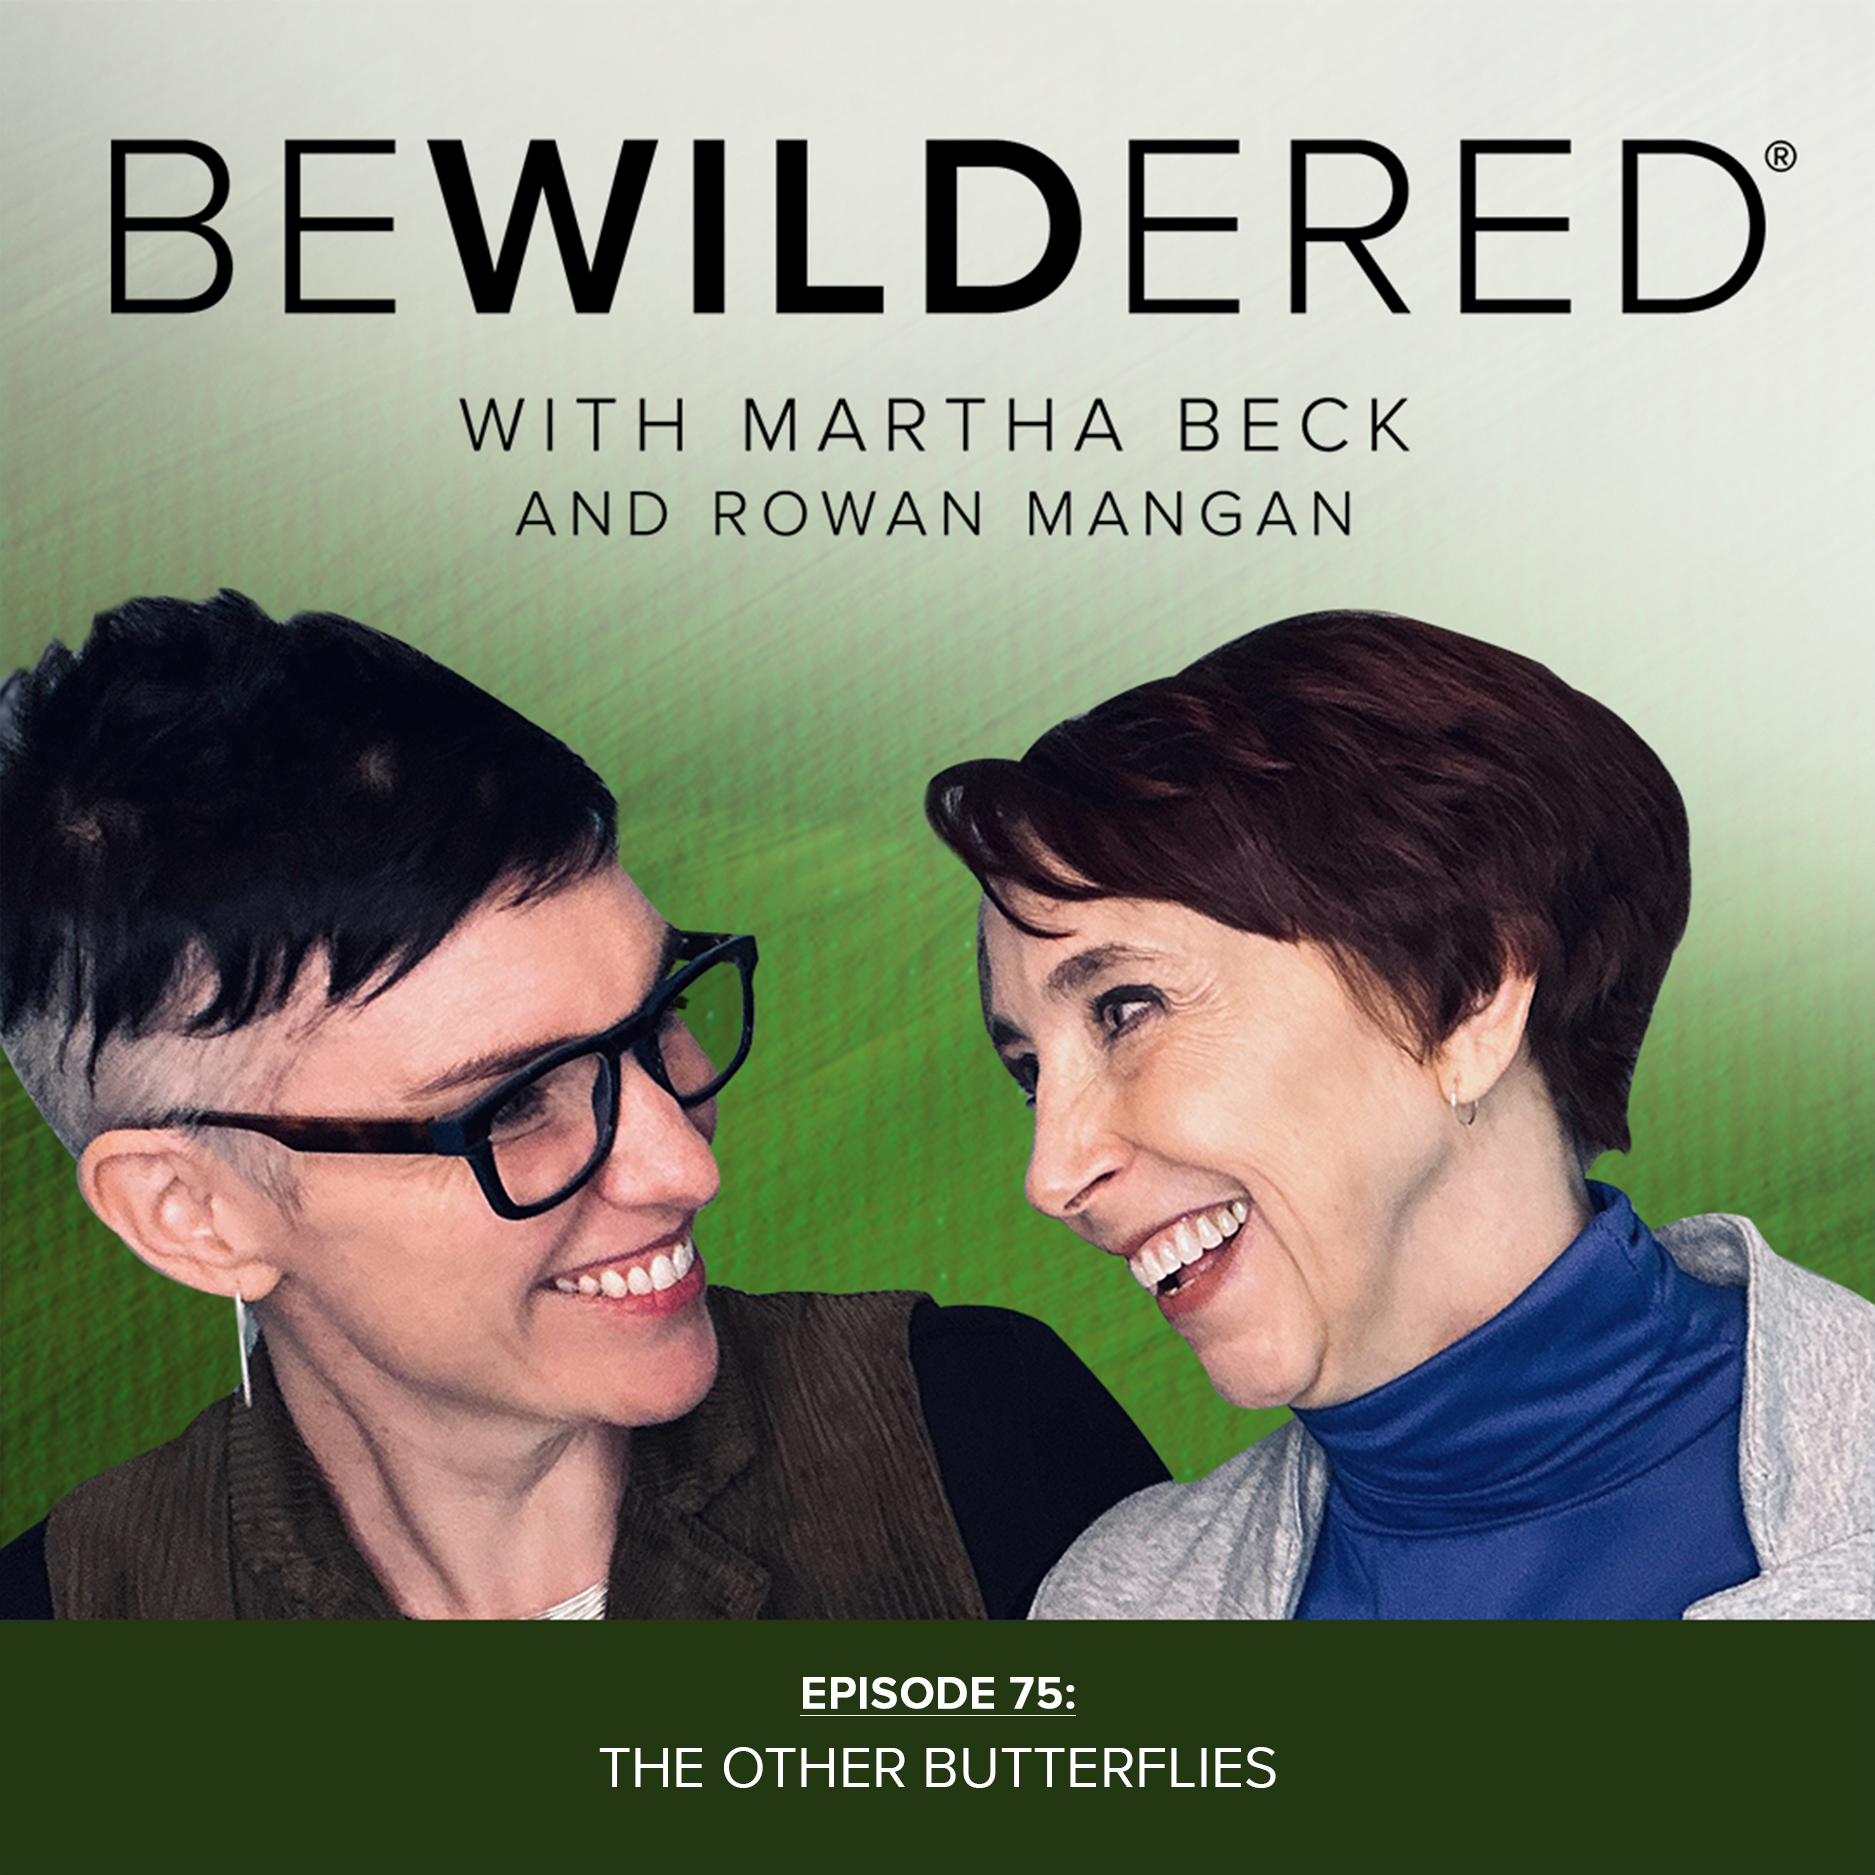 Image for Episode #75 The Other Butterflies for the Bewildered Podcast with Martha Beck and Rowan Mangan